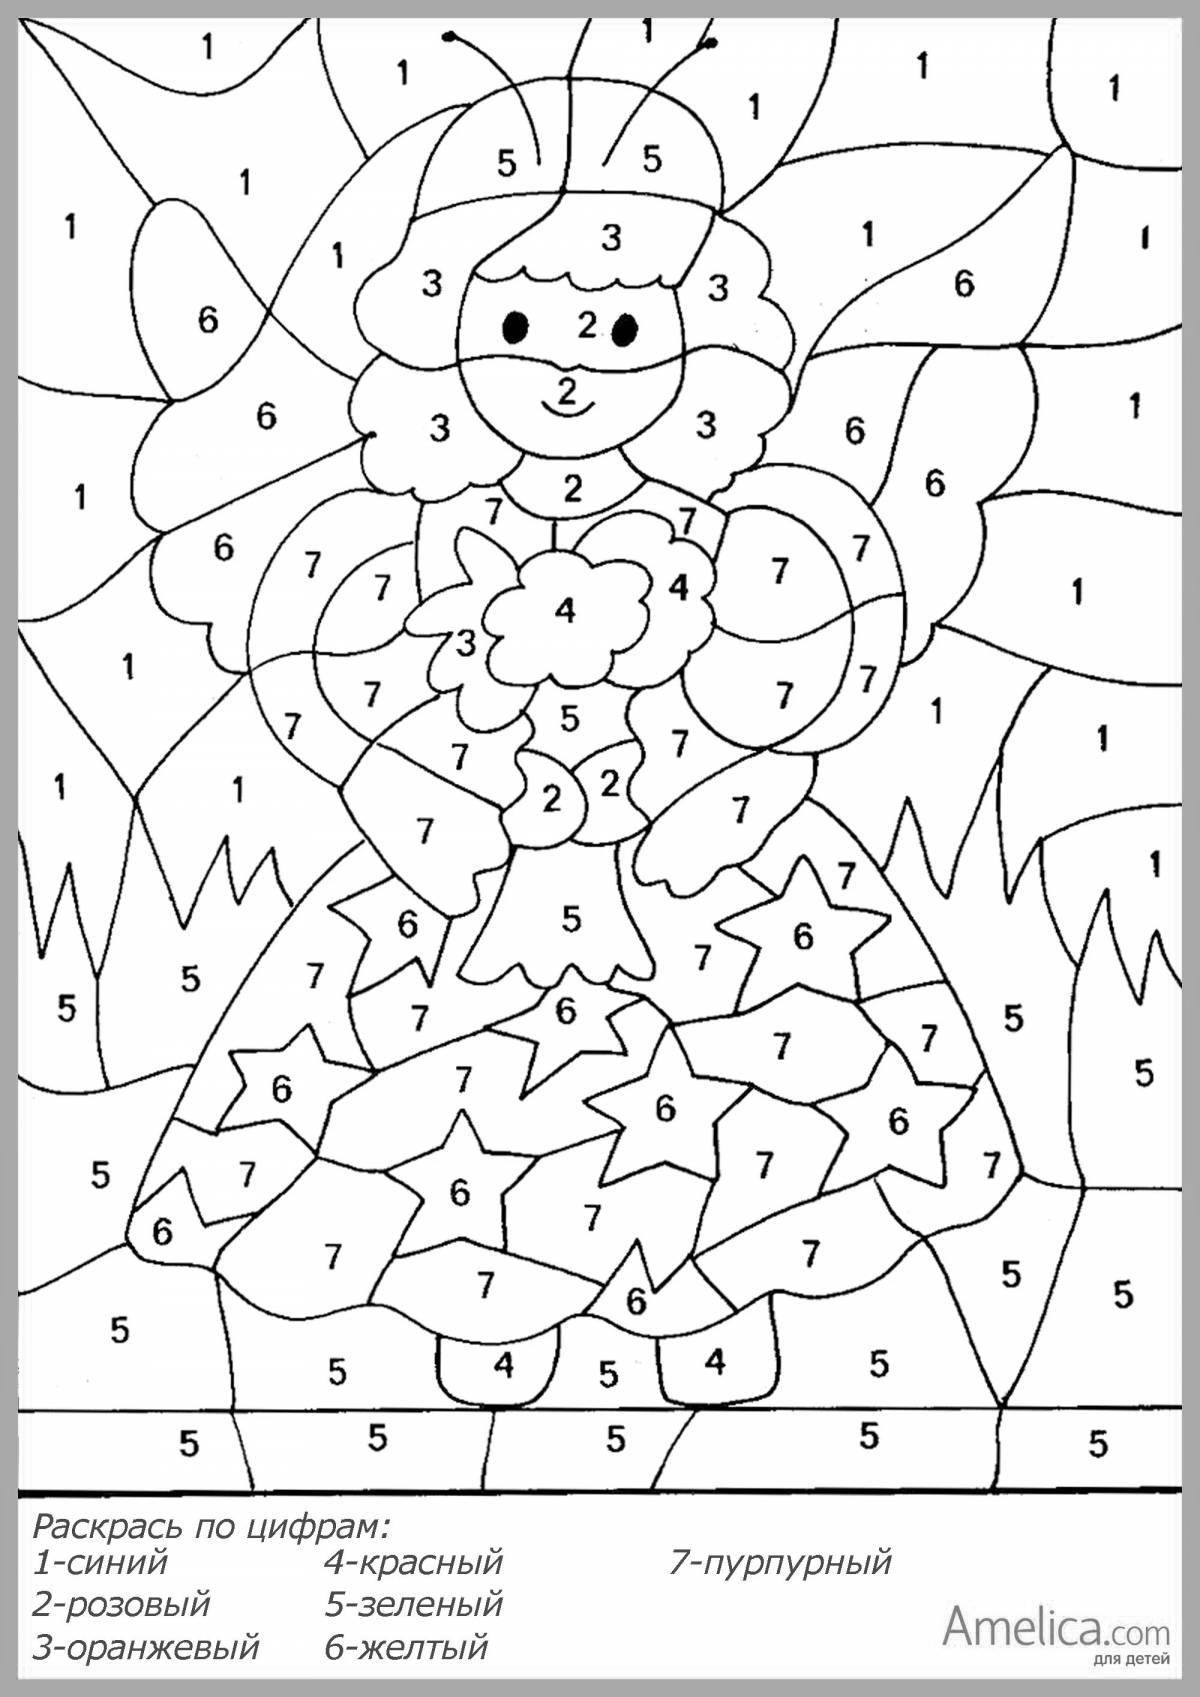 Color-wonder coloring page by numbers now